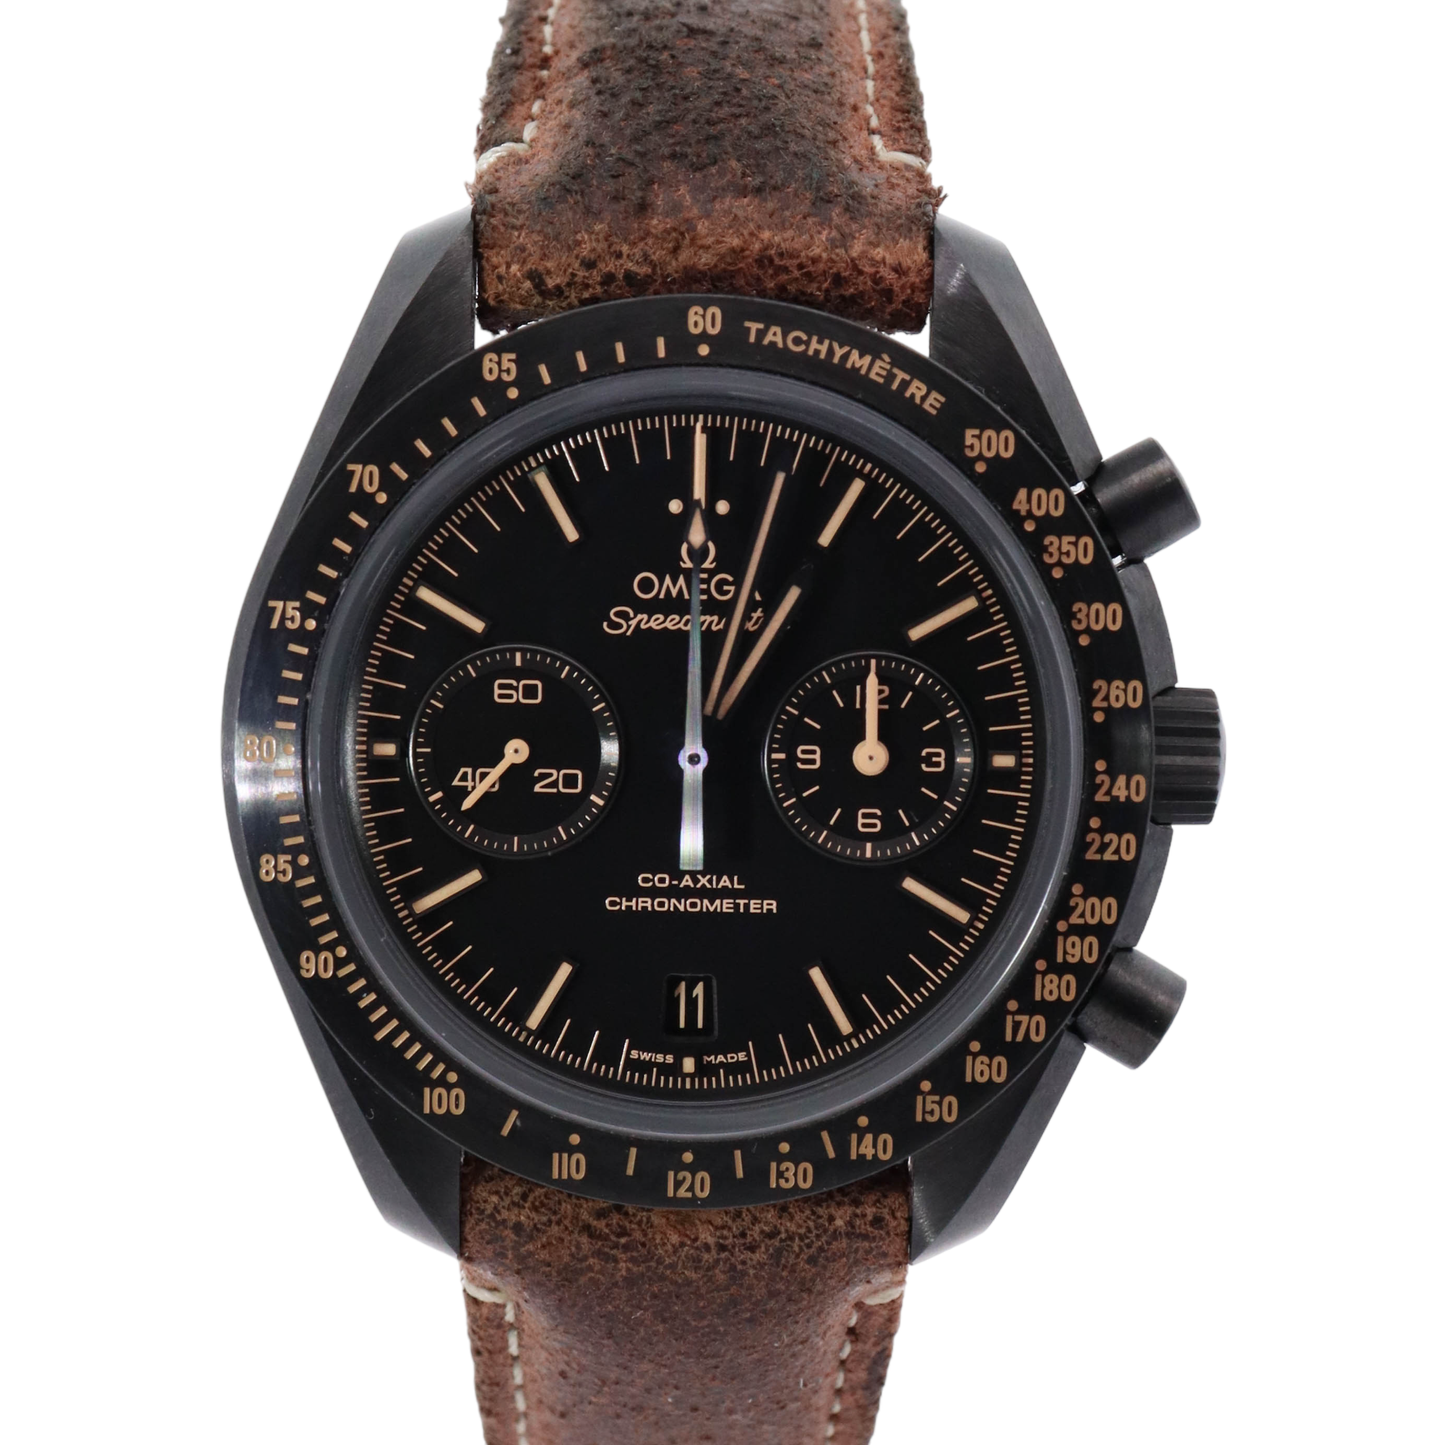 Load image into Gallery viewer, Omega Speedmaster 44.24 Ceramic Black Chronograph Dial Watch Reference# 311.92.44.51.01.006 - Happy Jewelers Fine Jewelry Lifetime Warranty
